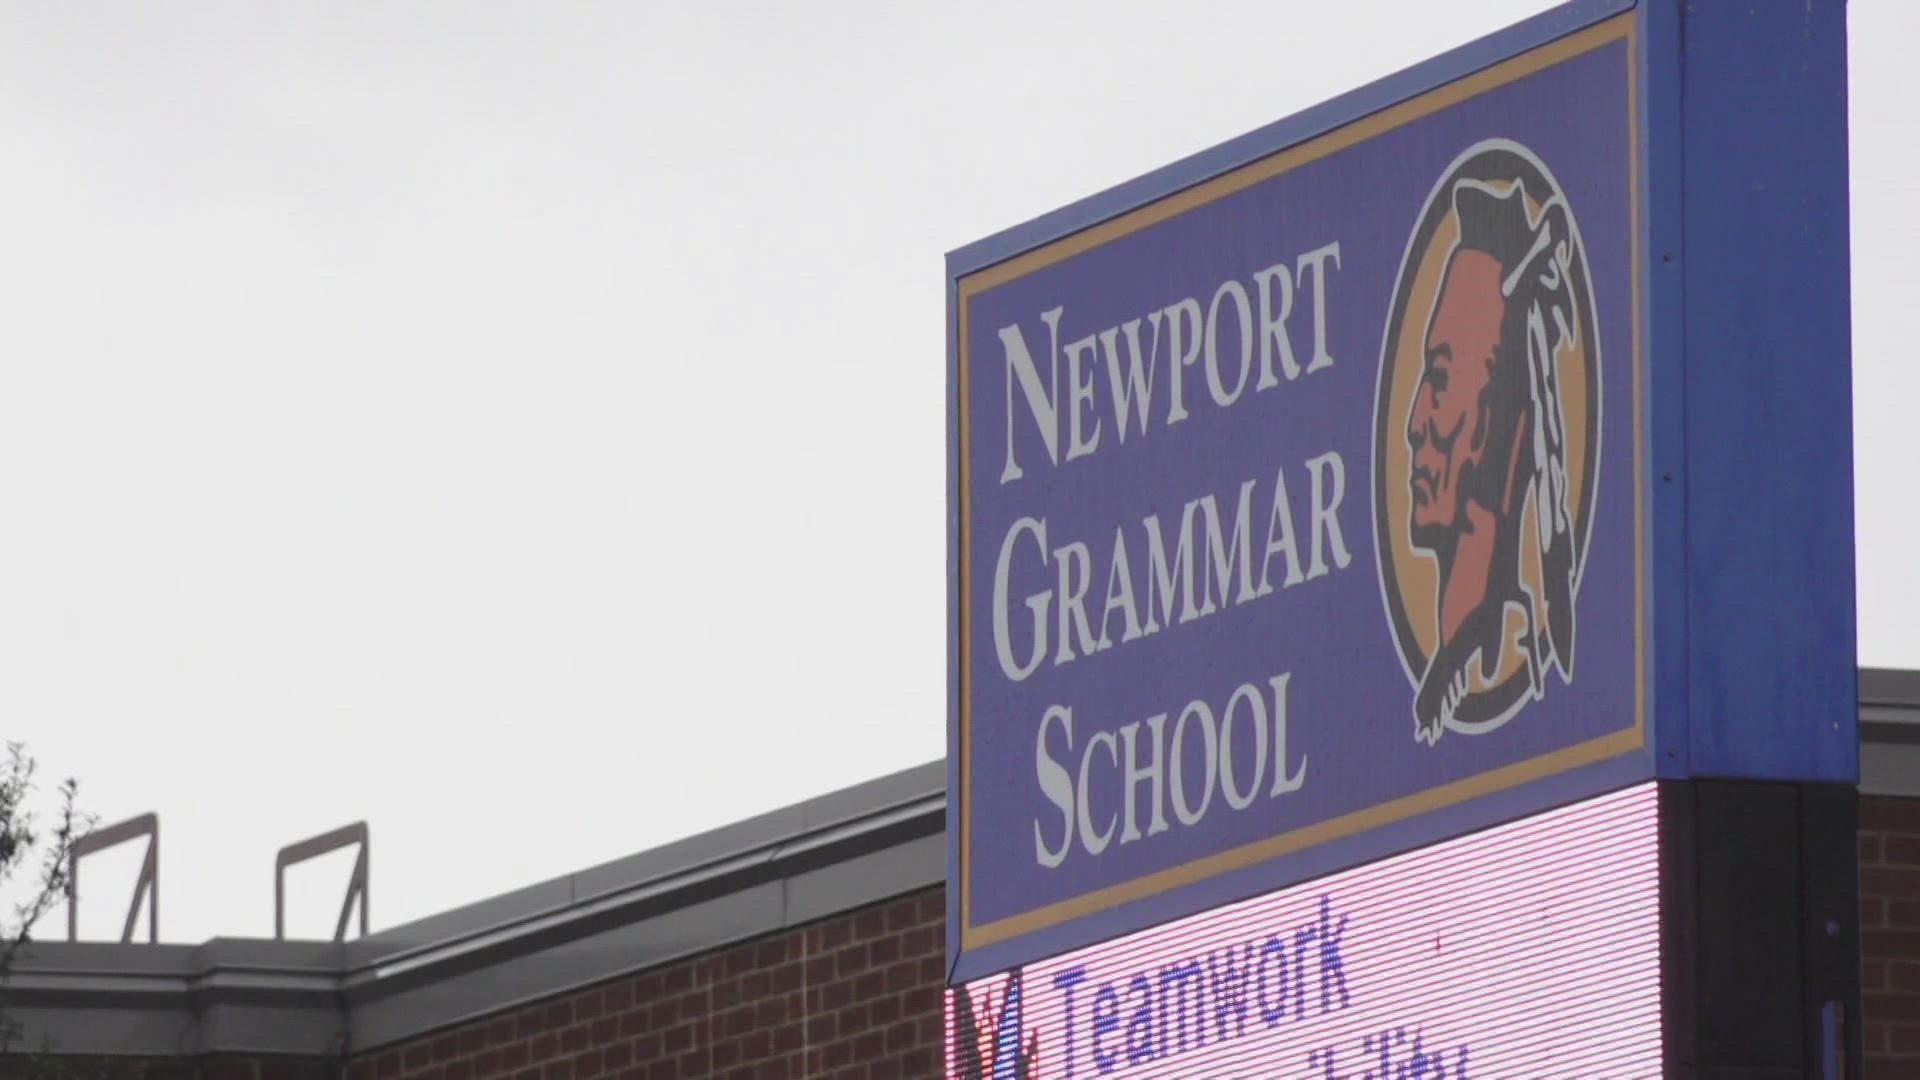 Students and staff from Newport Grammar School returned to the classroom after a terrifying storm.